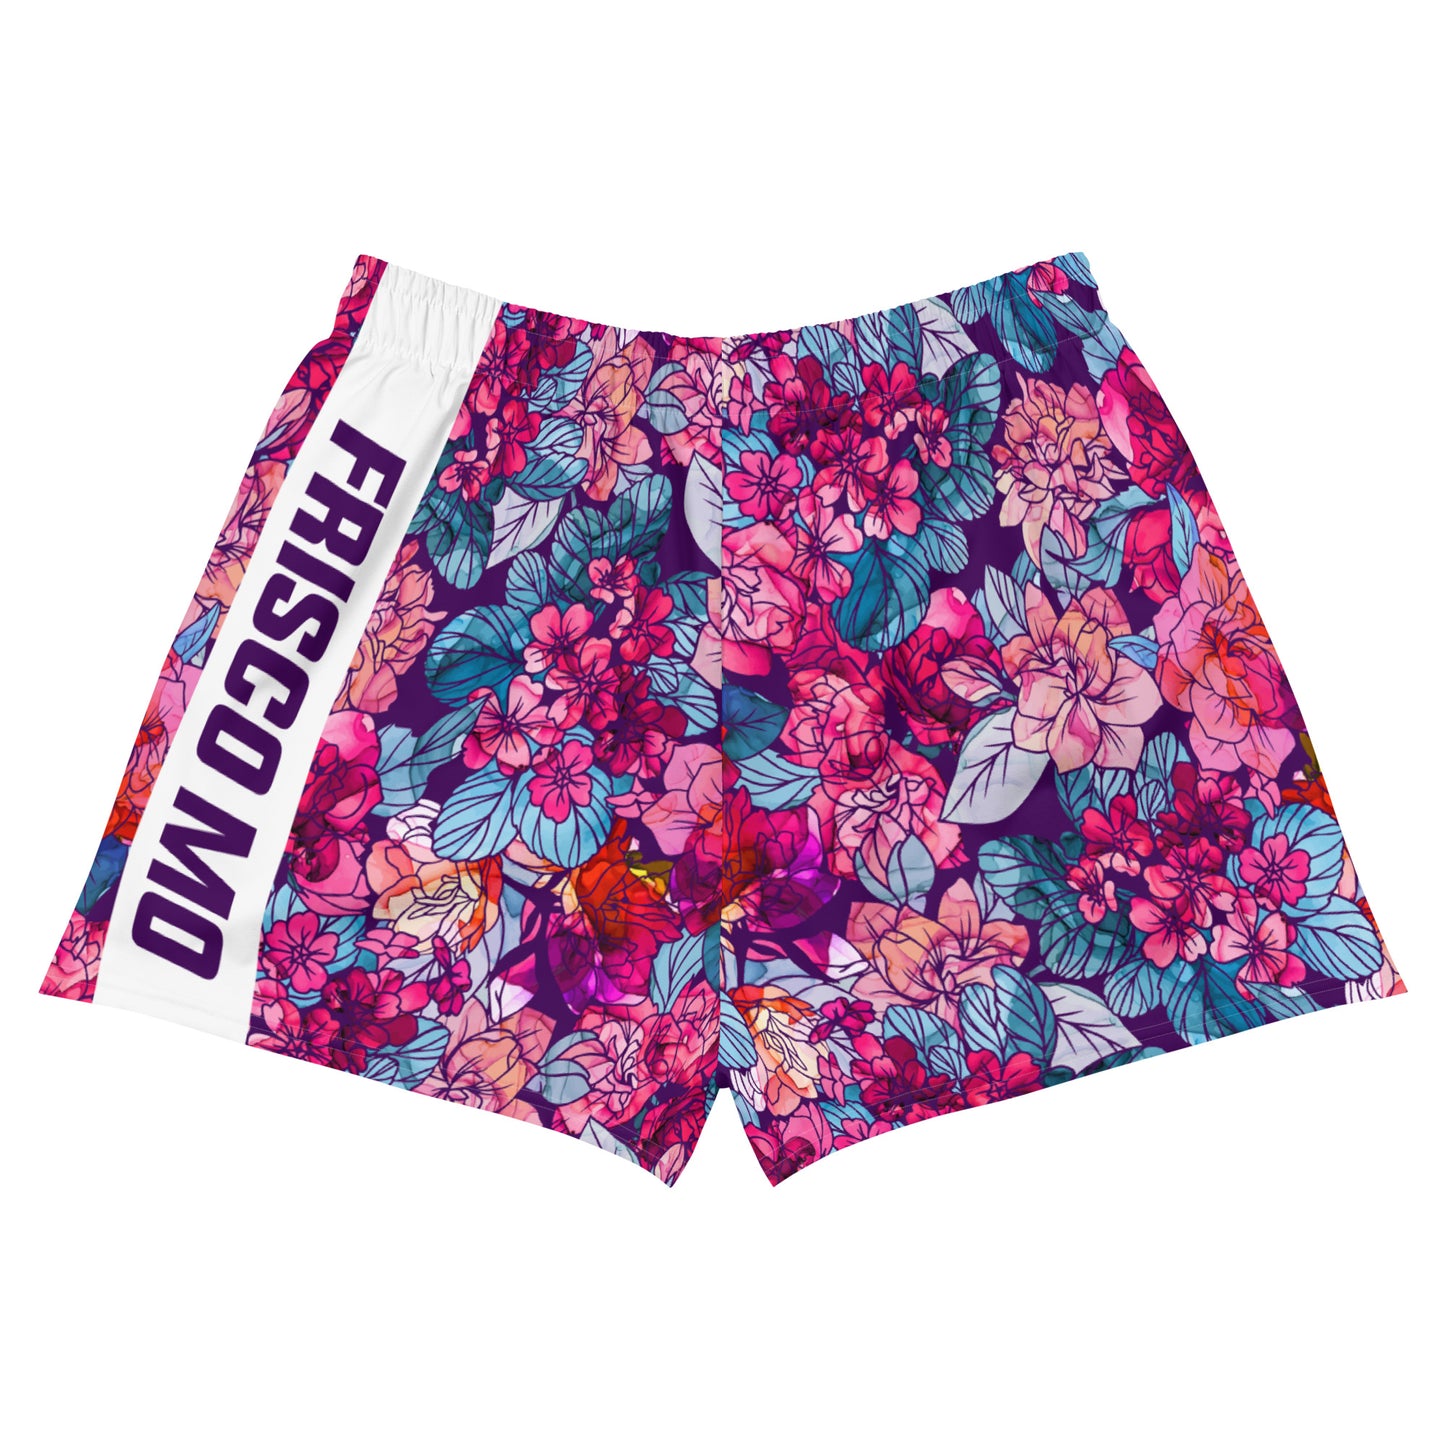 Stop and Smell the Flowers Women’s Volleys